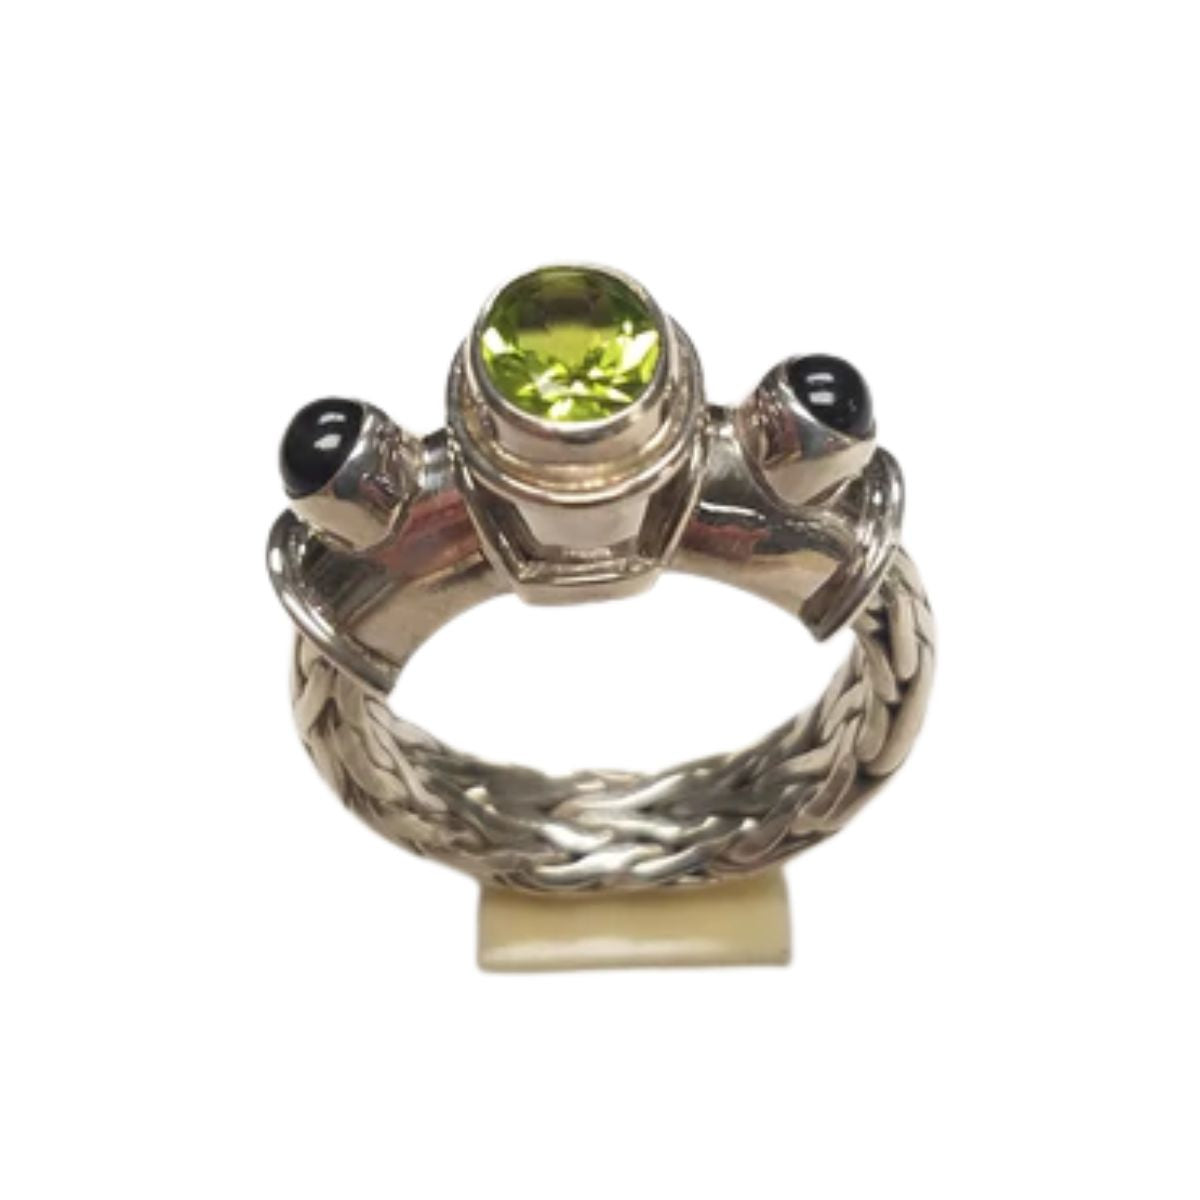 Ring- Peridot & Black Star Diopside w/ hand woven band